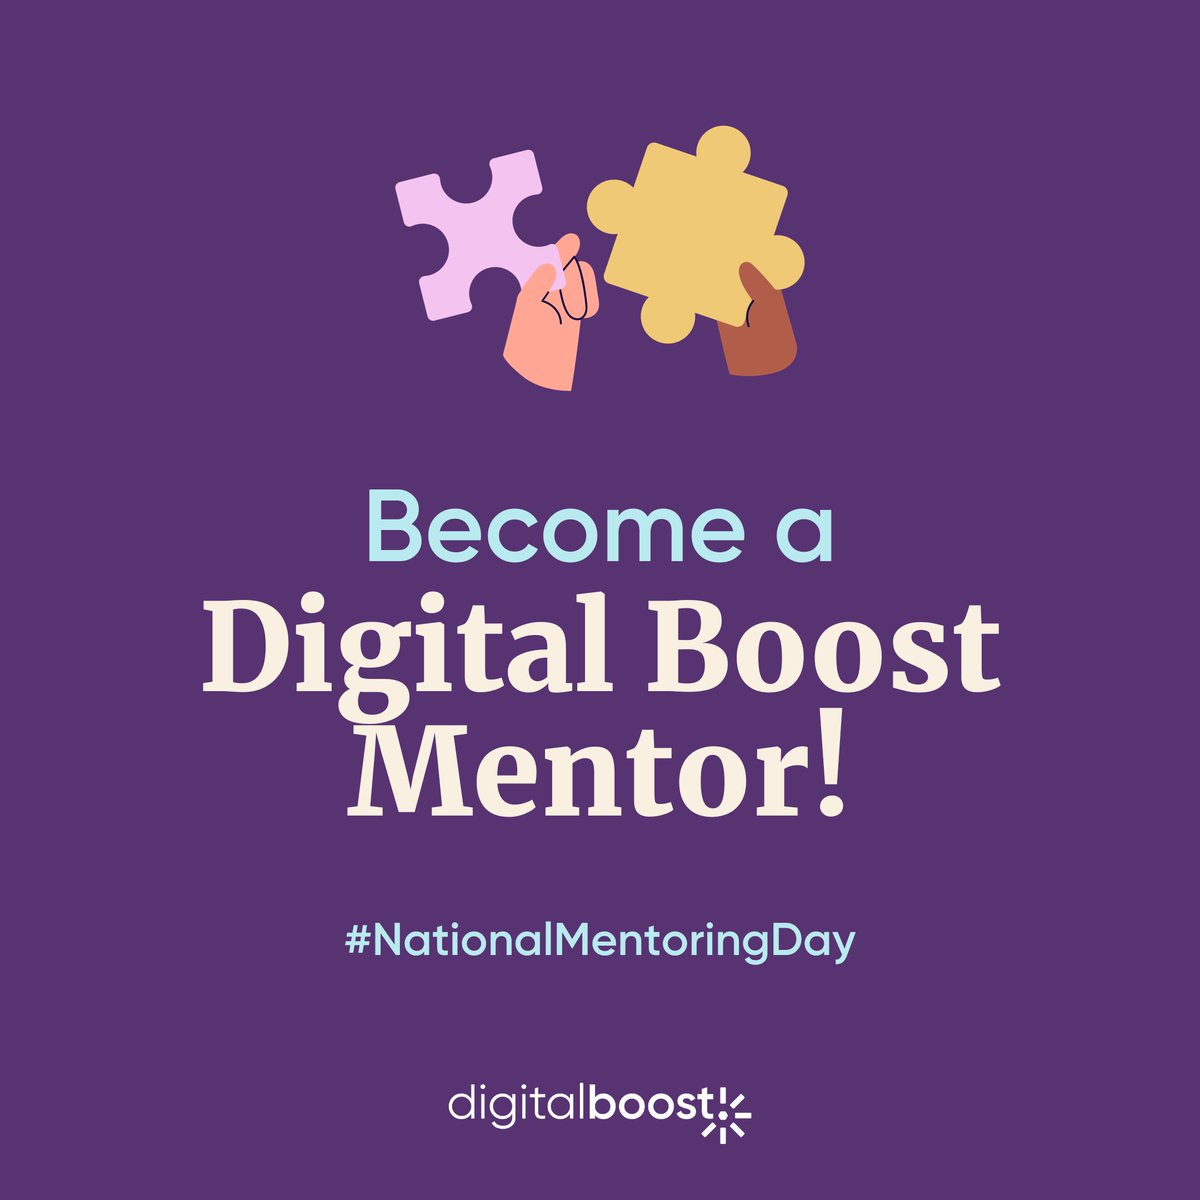 It's #NationalMentoringDay and delighted to support @digitalboost_uk on their efforts to help small businesses and charities with digital support! @karen_licurse @AngelaStathi @TechLondonAdv @TLA_Ed @UKTechAdv